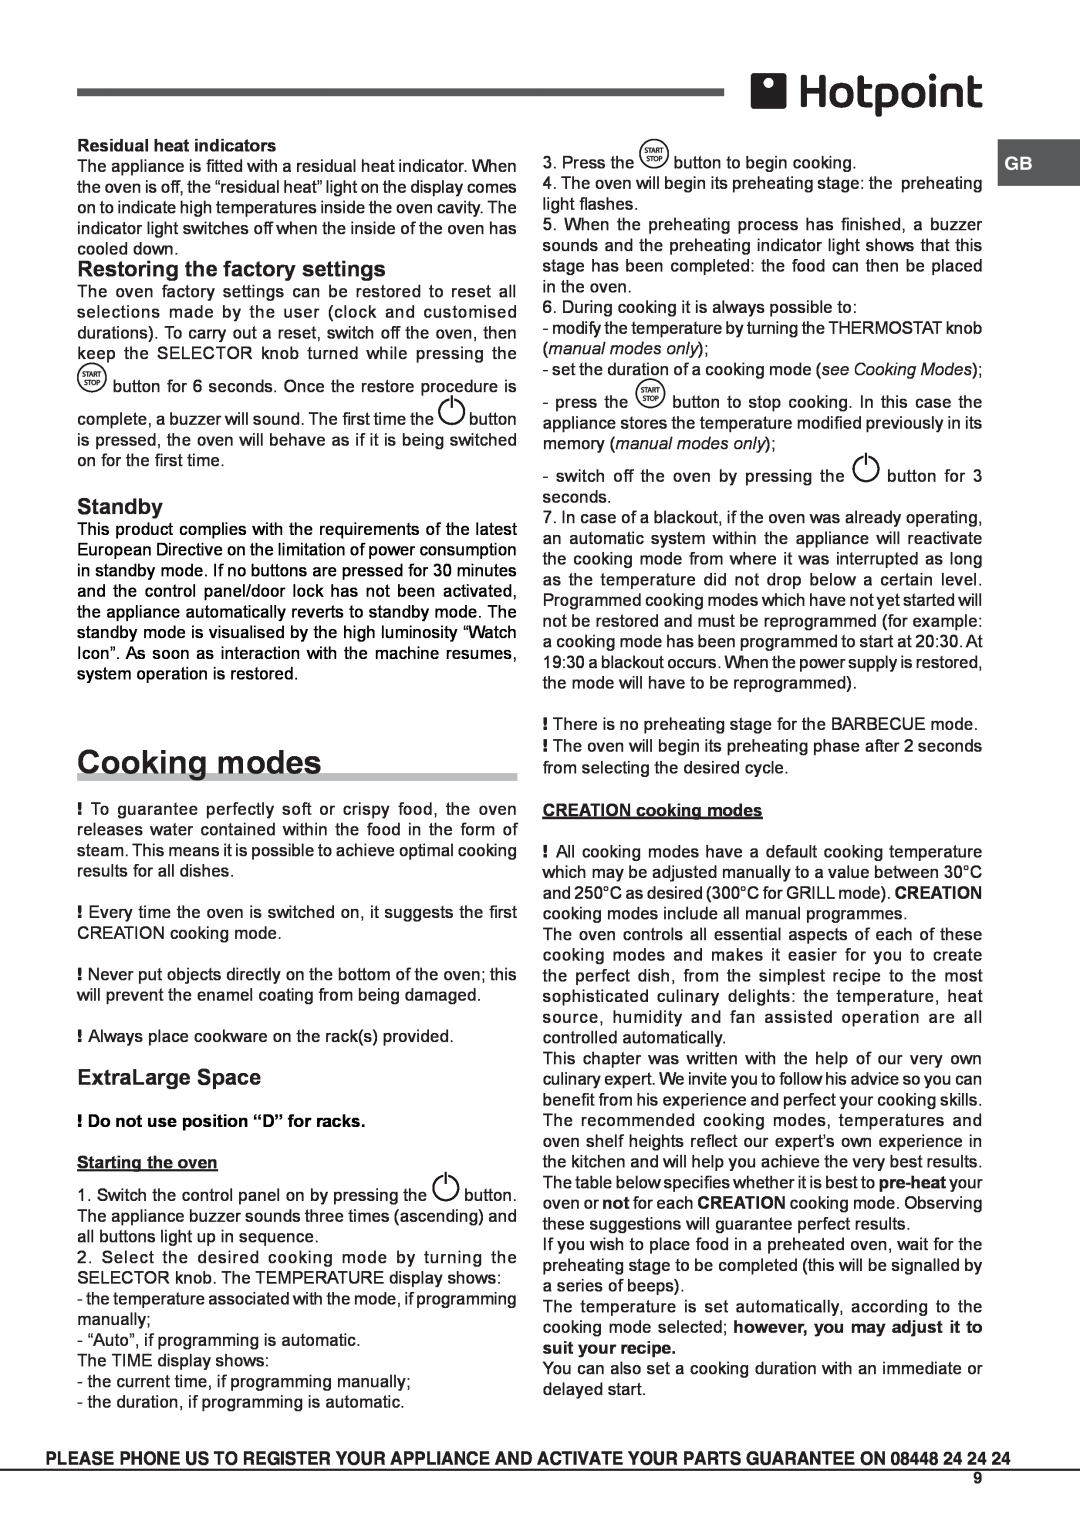 Hotpoint OSHS89EDC manual Cooking modes, Restoring the factory settings, Standby, ExtraLarge Space 